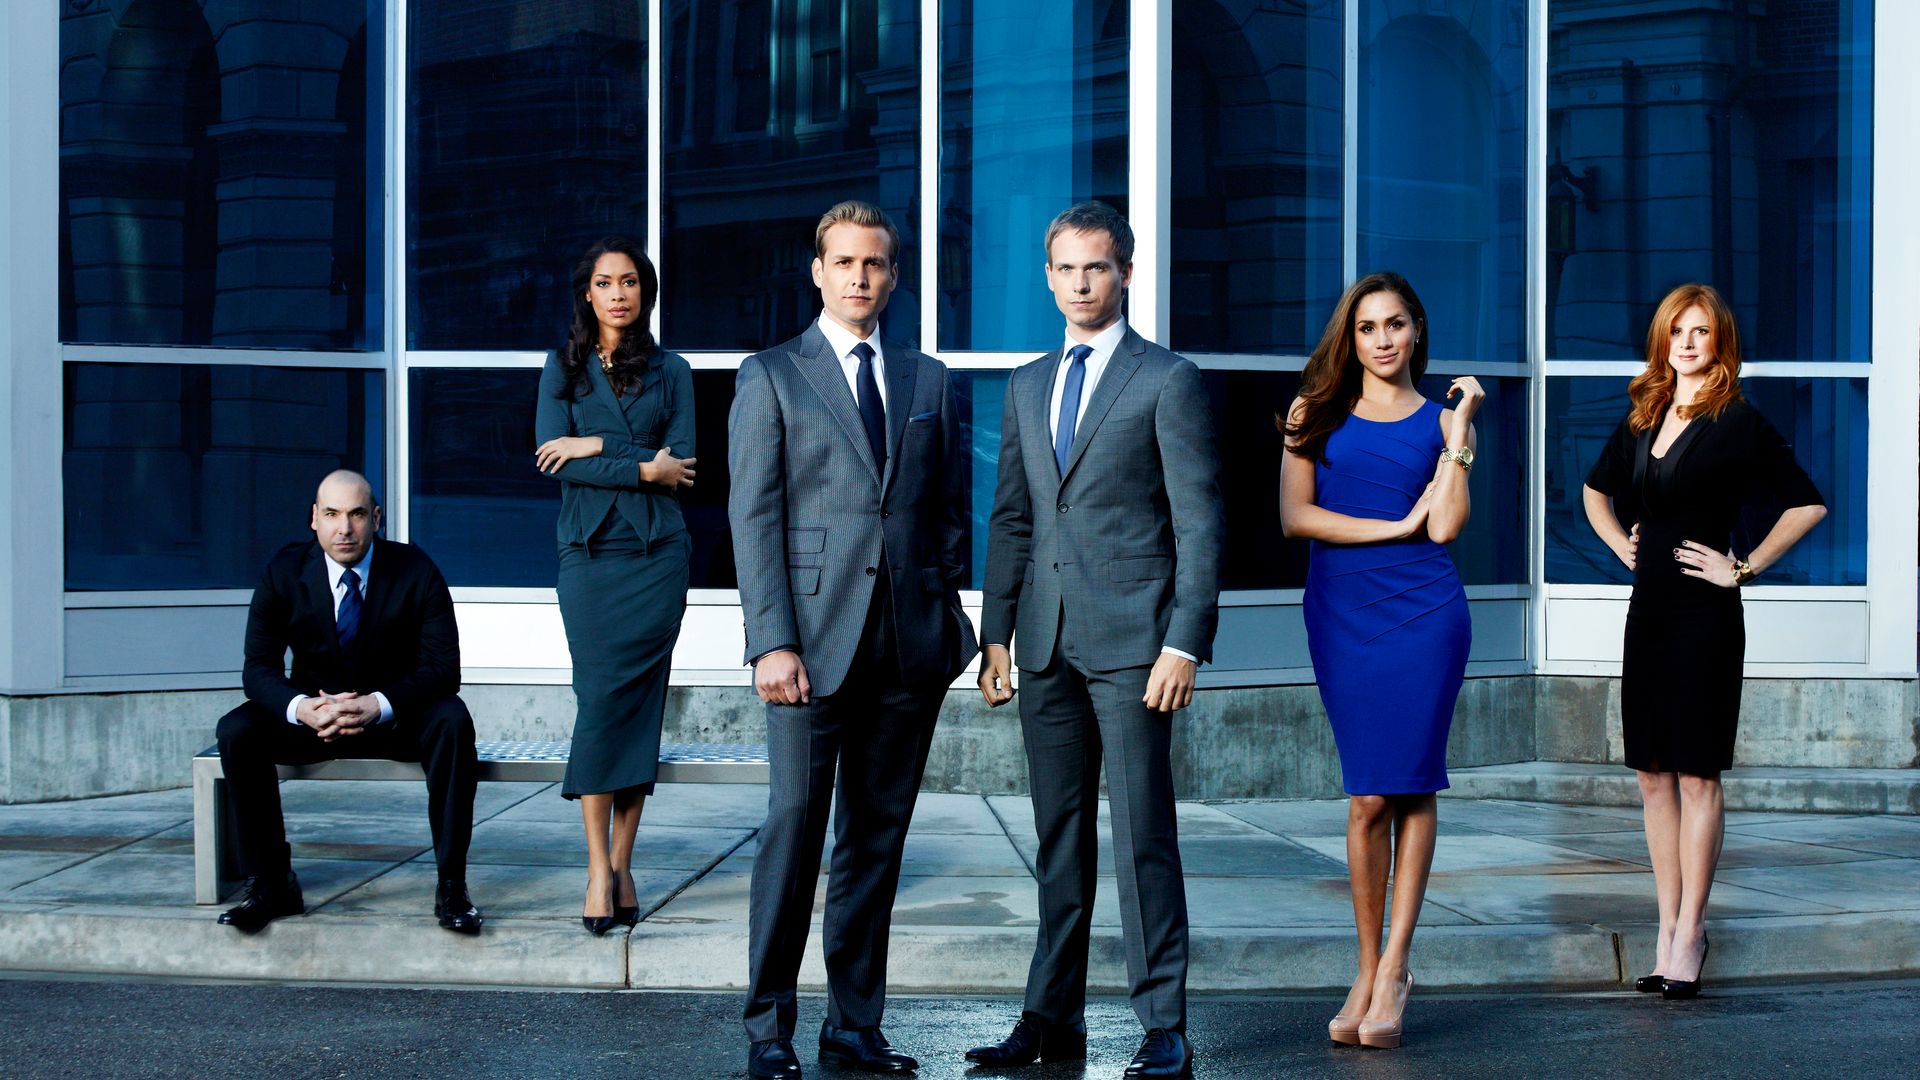 Suits ended in 2019 after nine successful seasons